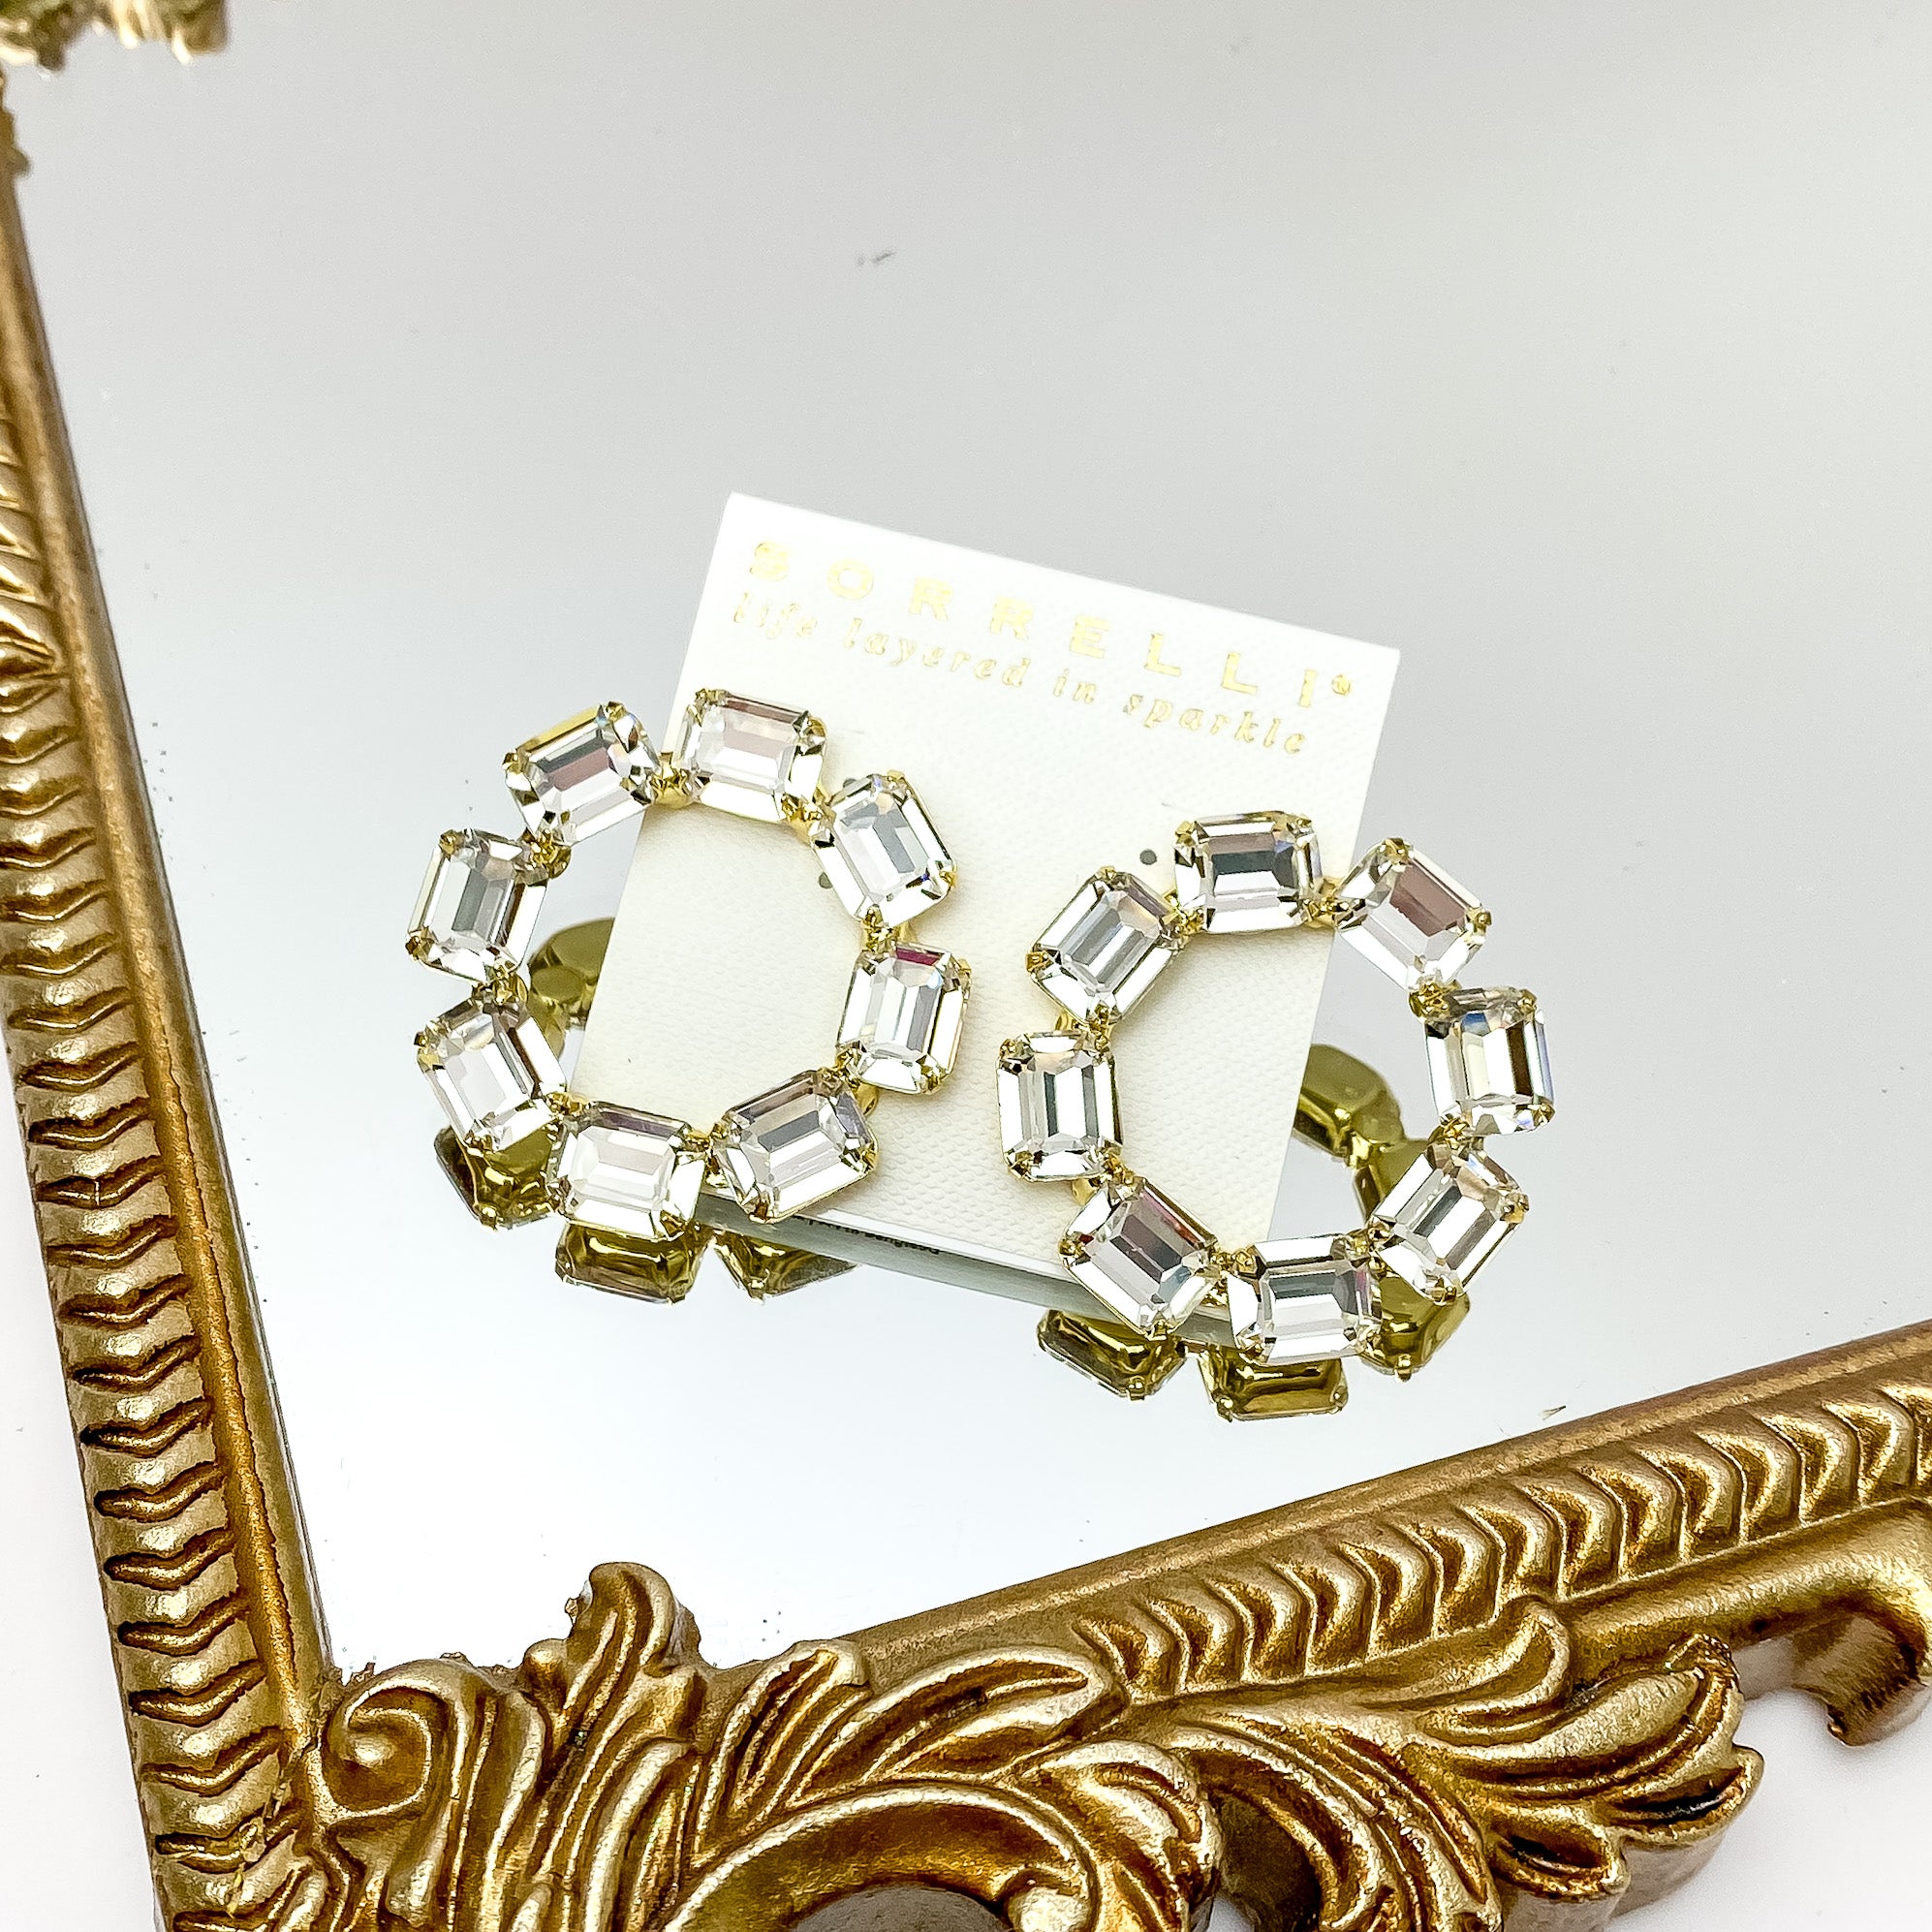 Eight rectangle clear crystals in the shape of an octagon post back earrings. These earrings have a gold setting and gold prongs to hold the crystals in place. These earrings are pictured on a gold mirror on a white background. 